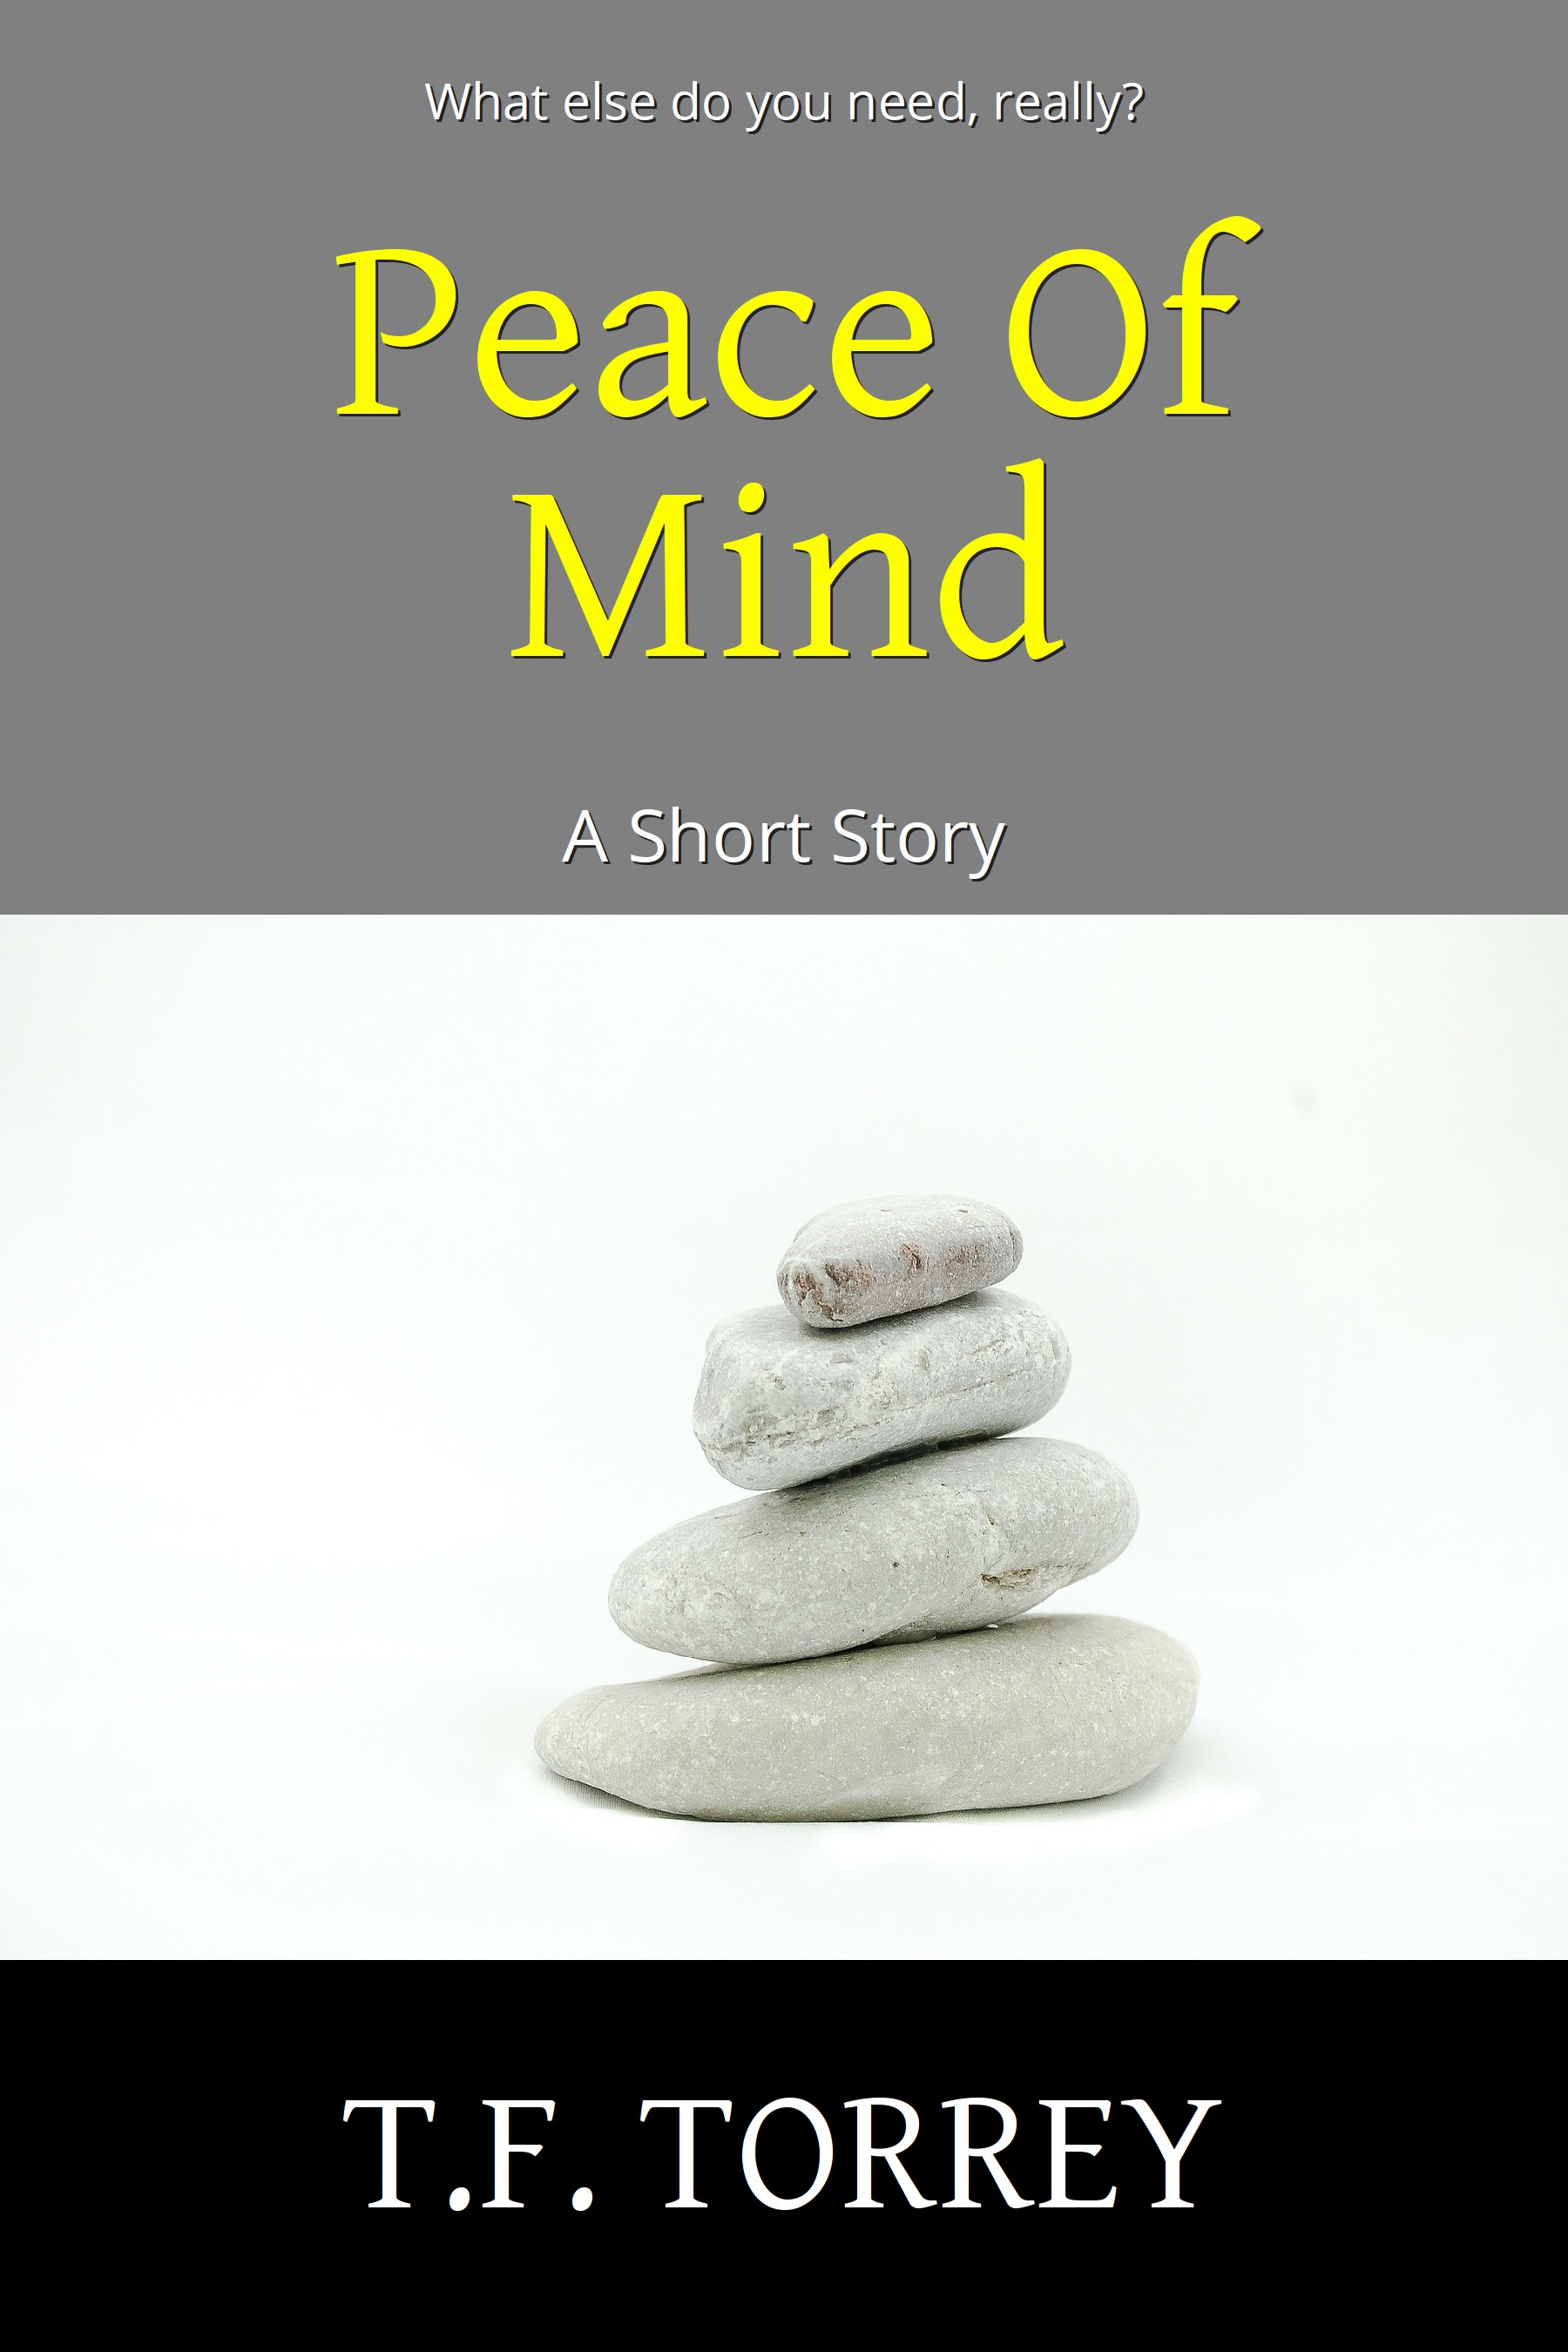 Cover of Peace of Mind: A Short Story by T.F. Torrey